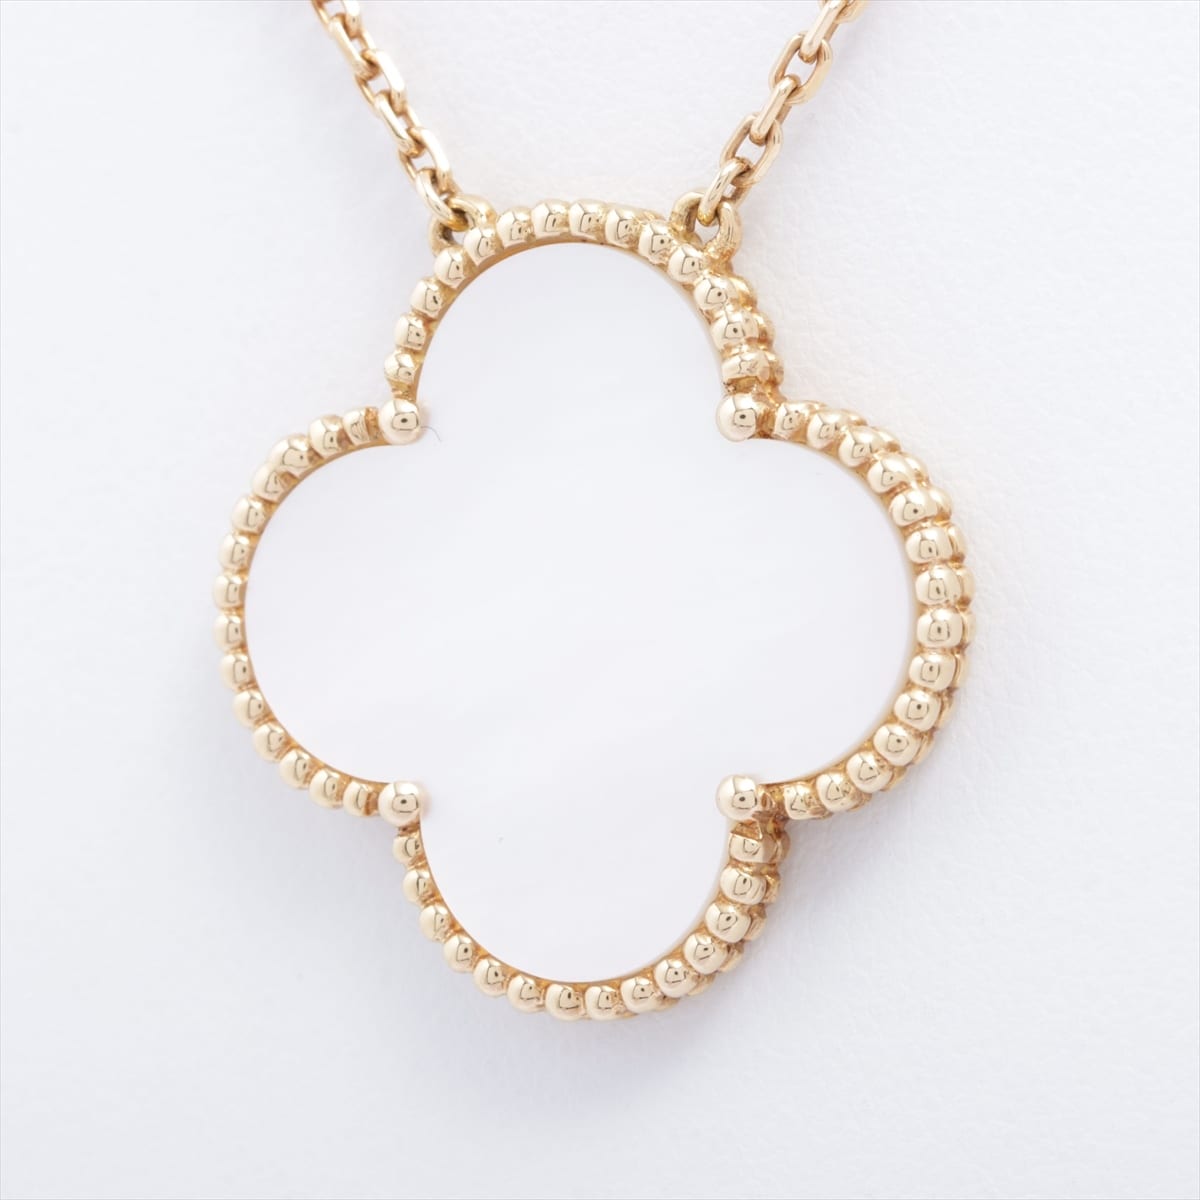 Van Cleef & Arpels Magic Alhambra shells Necklace 750(YG) 10.5g Limited to the 100th anniversary